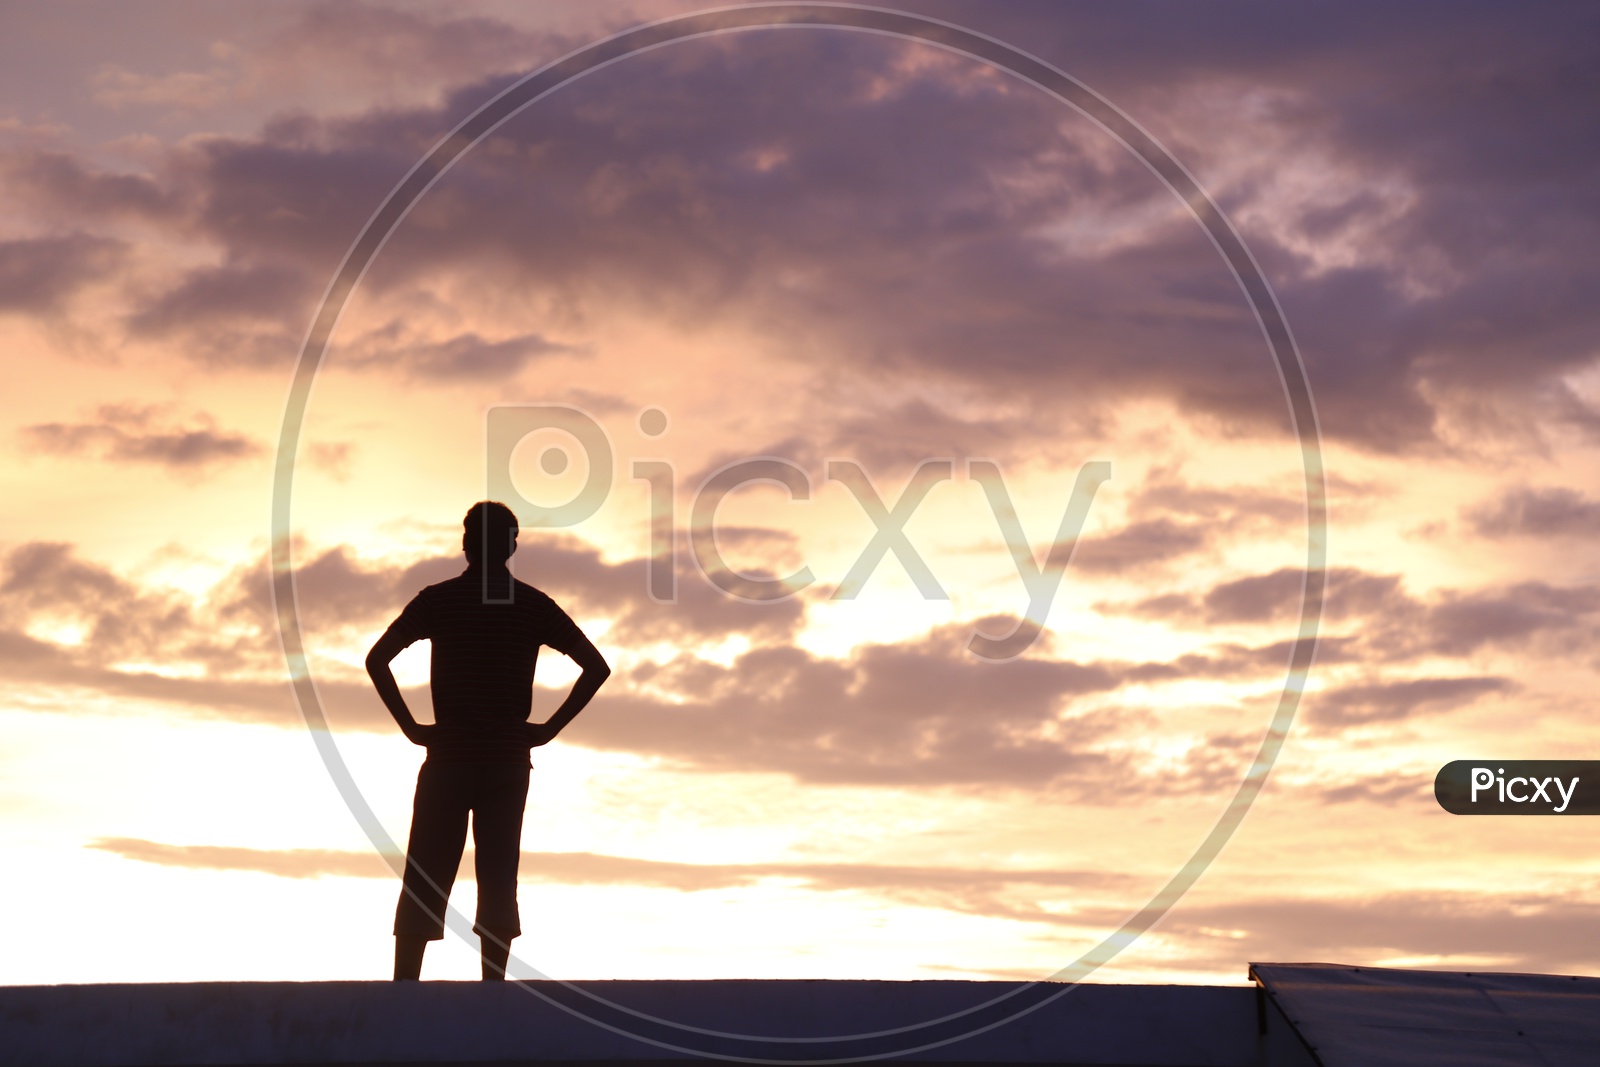 Silhouette Of a Young Man Standing Alone  Over a Sunset Sky